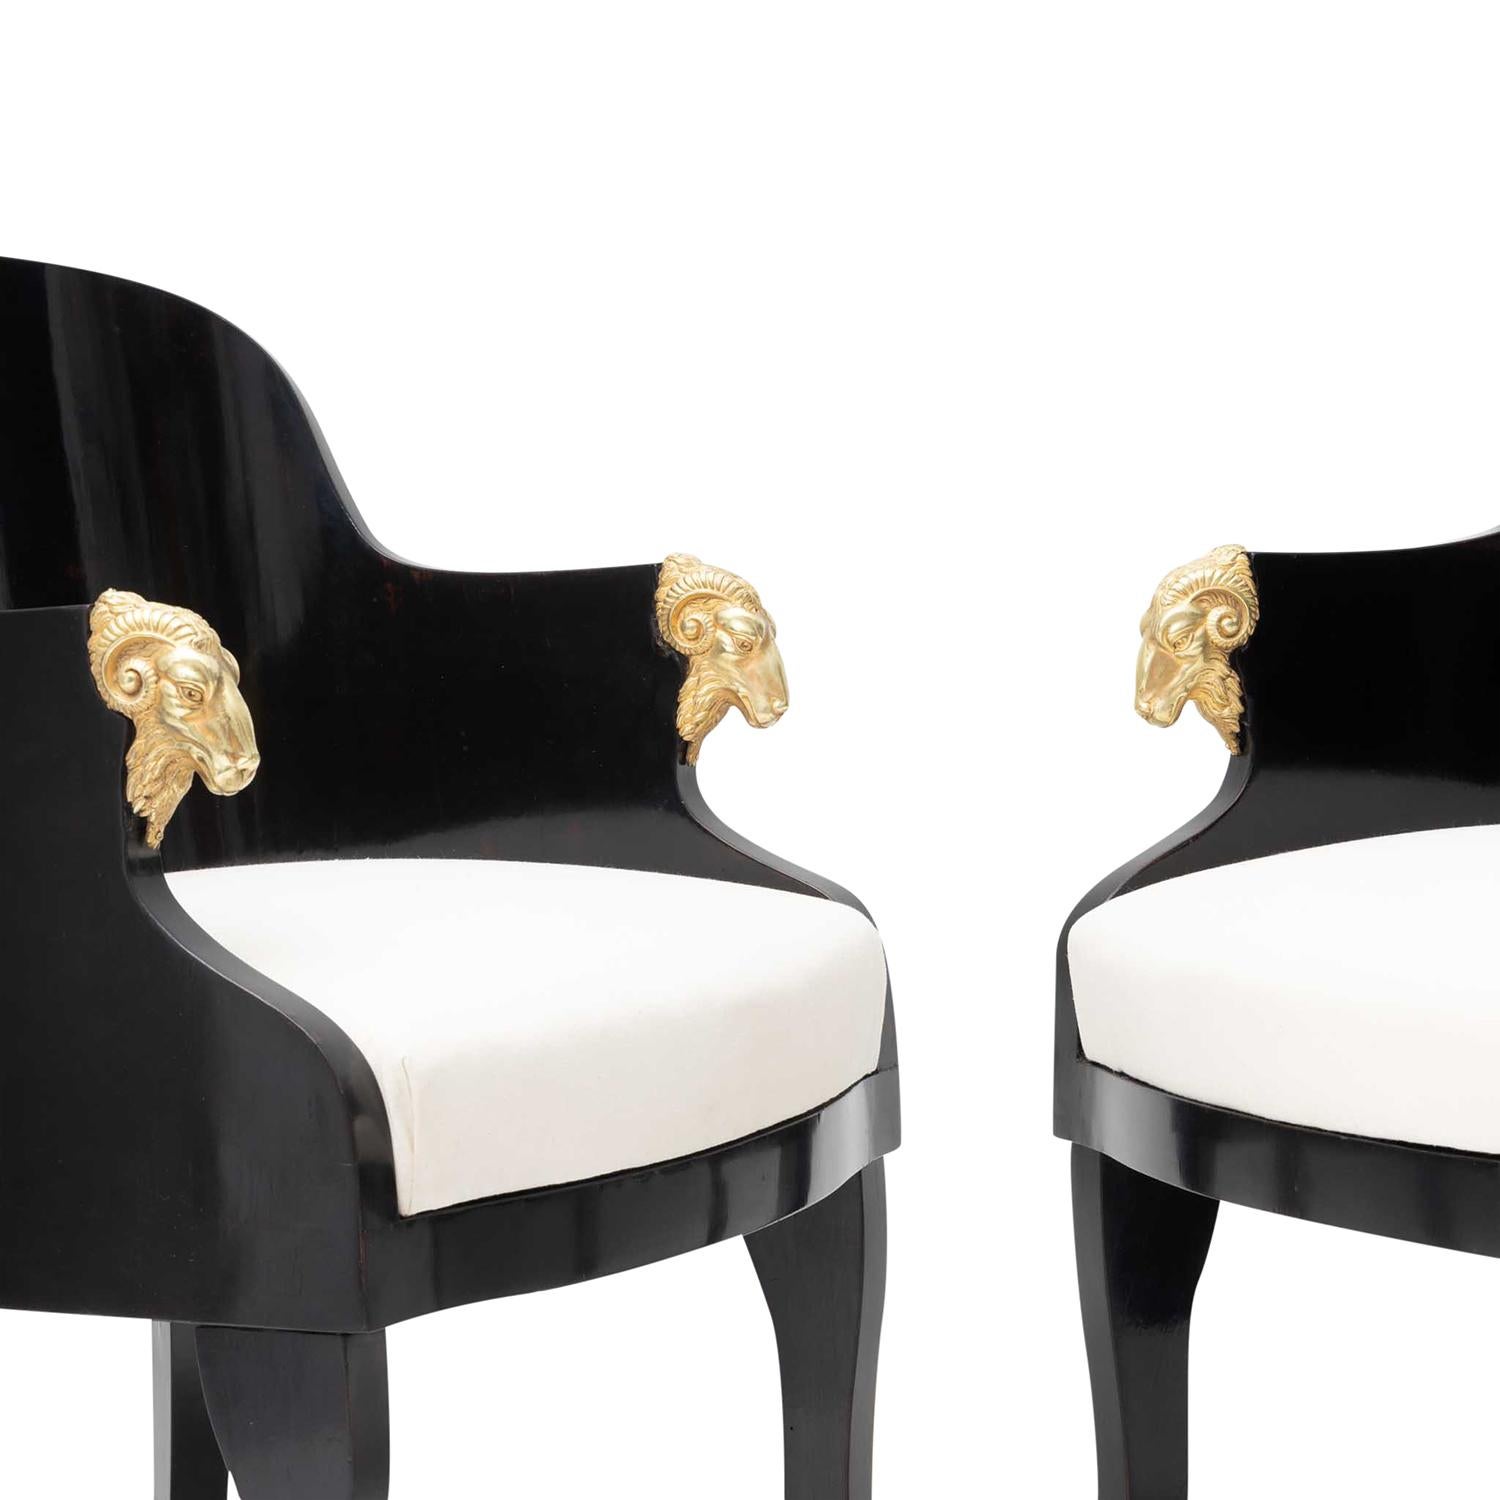 19th Century Black Baltic Pair of Lacquered Birch Armchairs, Antique Side Chairs In Good Condition For Sale In West Palm Beach, FL